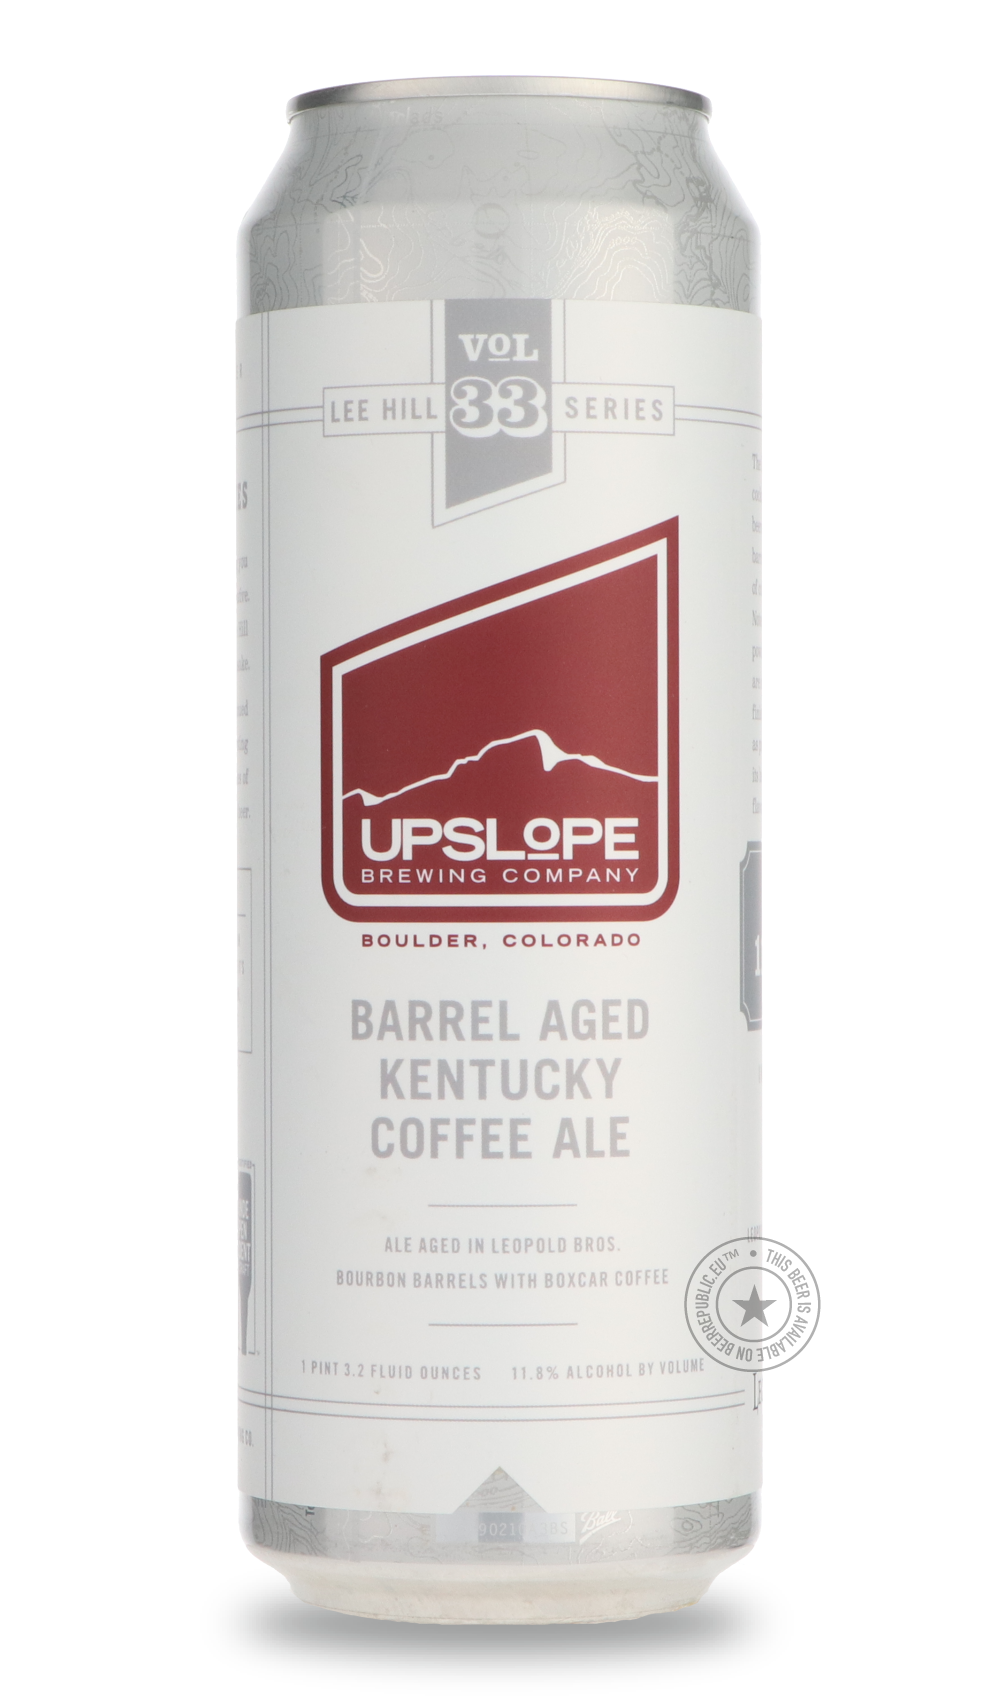 -Upslope- Lee Hill Vol. 33 Barrel Aged Kentucky Coffee Ale-Brown & Dark- Only @ Beer Republic - The best online beer store for American & Canadian craft beer - Buy beer online from the USA and Canada - Bier online kopen - Amerikaans bier kopen - Craft beer store - Craft beer kopen - Amerikanisch bier kaufen - Bier online kaufen - Acheter biere online - IPA - Stout - Porter - New England IPA - Hazy IPA - Imperial Stout - Barrel Aged - Barrel Aged Imperial Stout - Brown - Dark beer - Blond - Blonde - Pilsner 